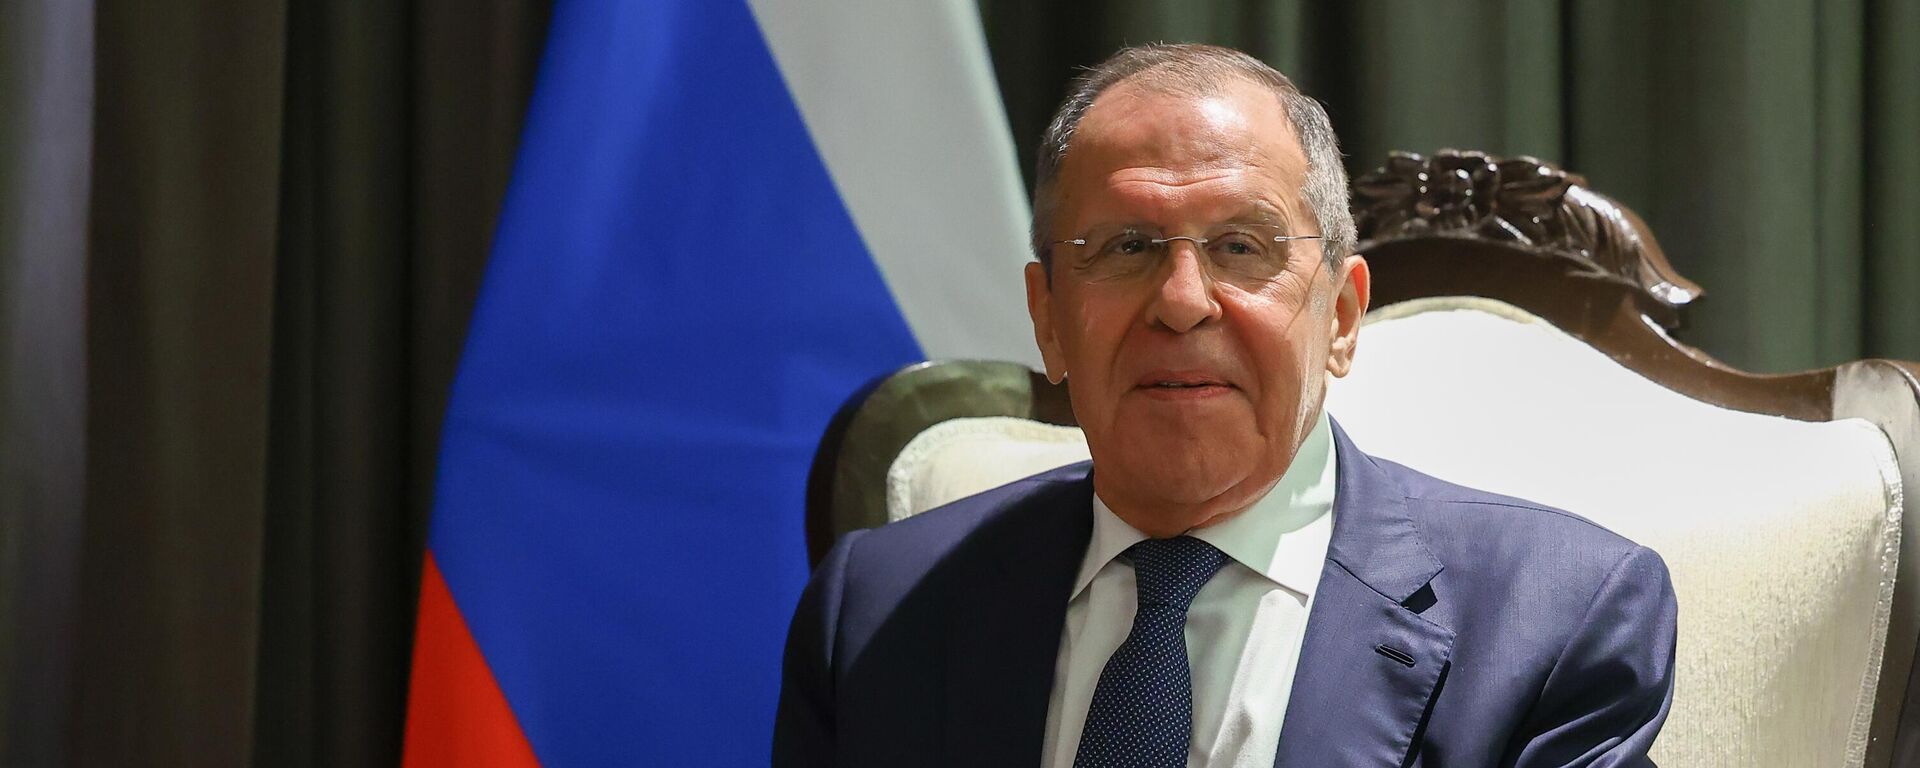 Russian Foreign Minister Sergey Lavrov on the sidelines of the SCO meeting in Goa on MAy 4-5. - Sputnik India, 1920, 05.05.2023